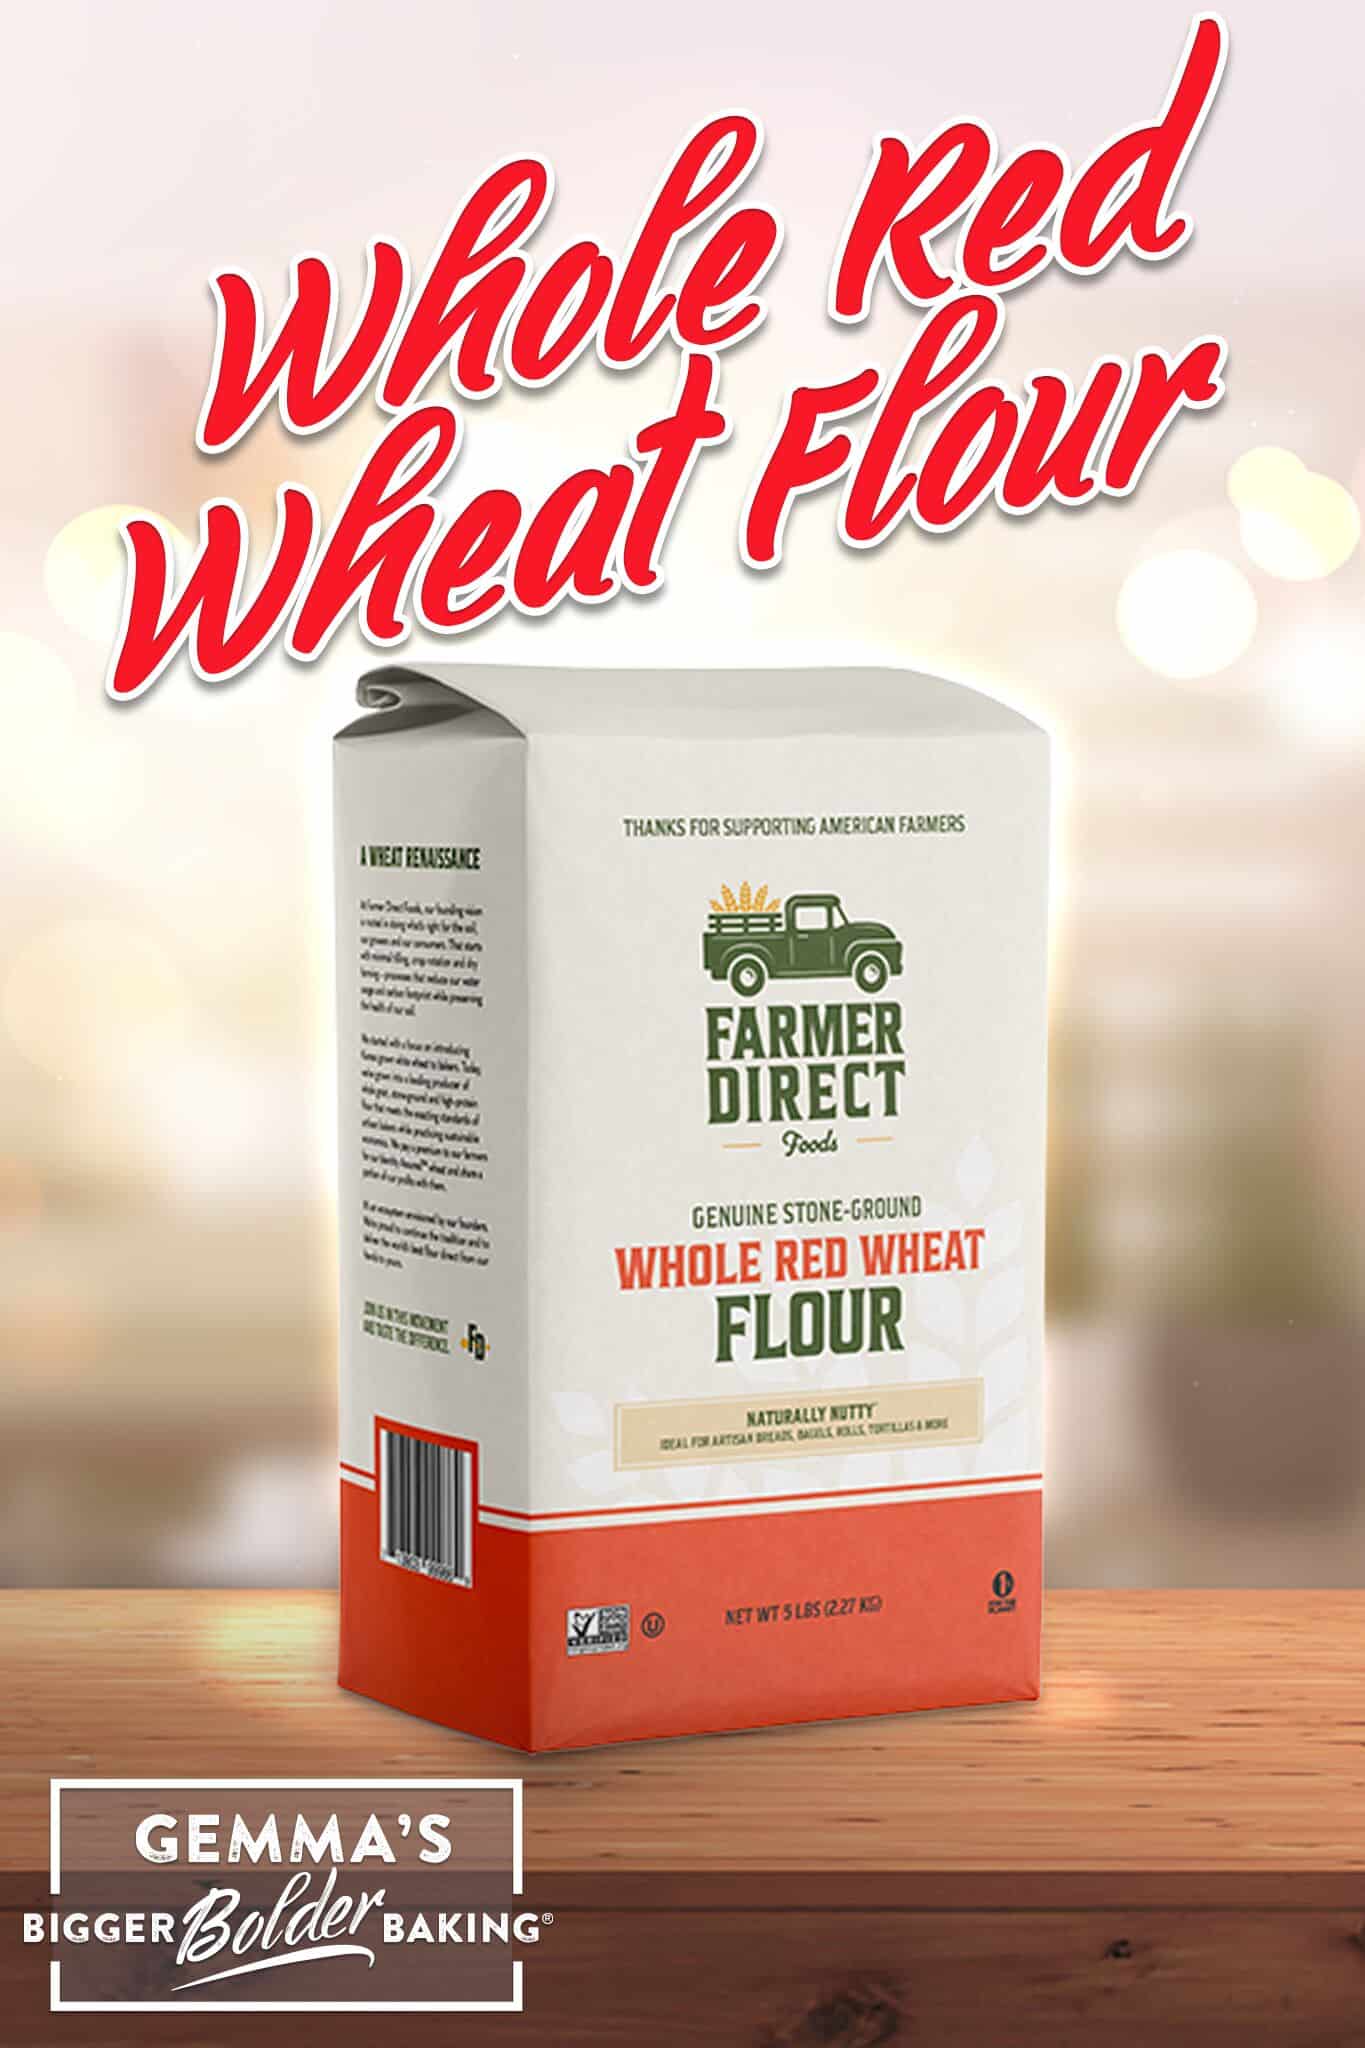 Ultimate Guide to 10 Types of Flour for Baking: Whole Red Wheat Flour: 1)protein 12.5%-13.5%, 2)whole grain with a nutty flavor, brown color, and hearty, chewy texture 3)Best uses: yeasted breads, flatbreads, chapatis, tortillas 